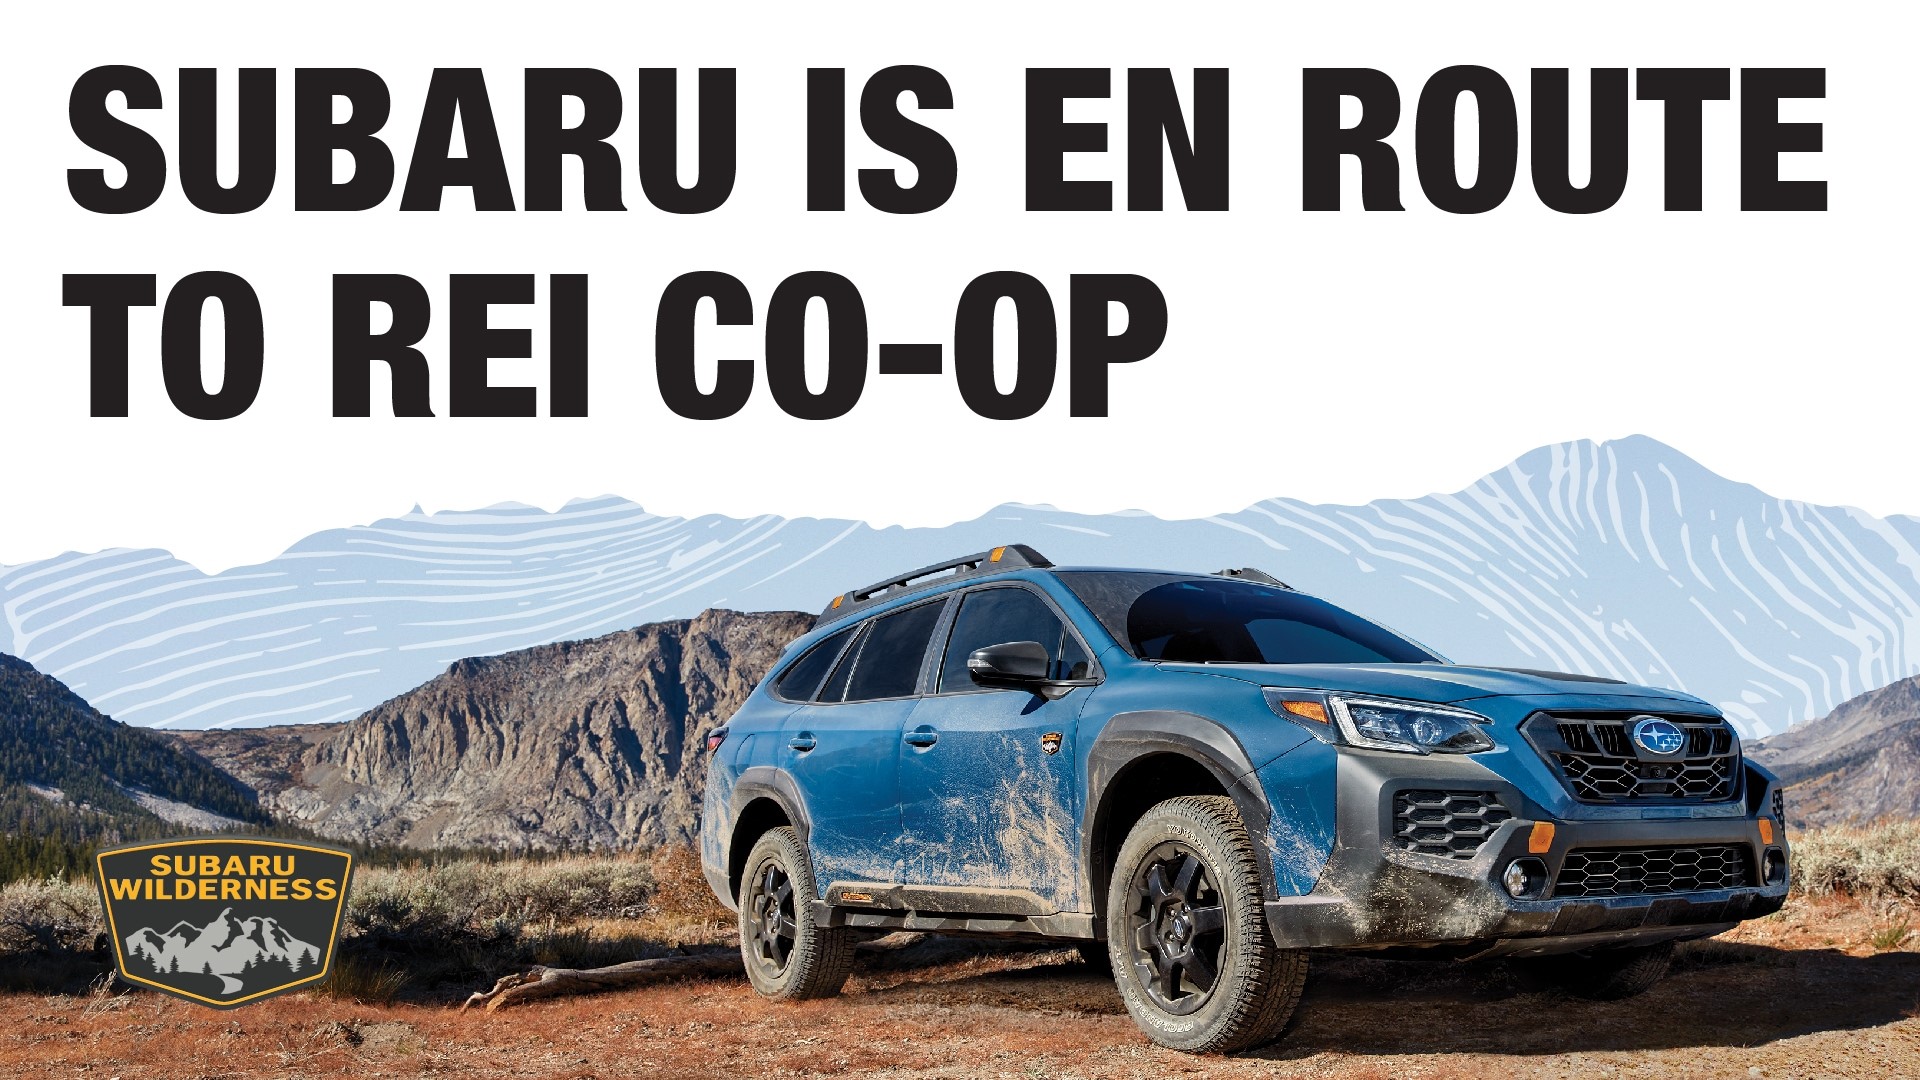 subaru is en route to rei co-op. image of subaru wilderness on dirt road with mountains in the background